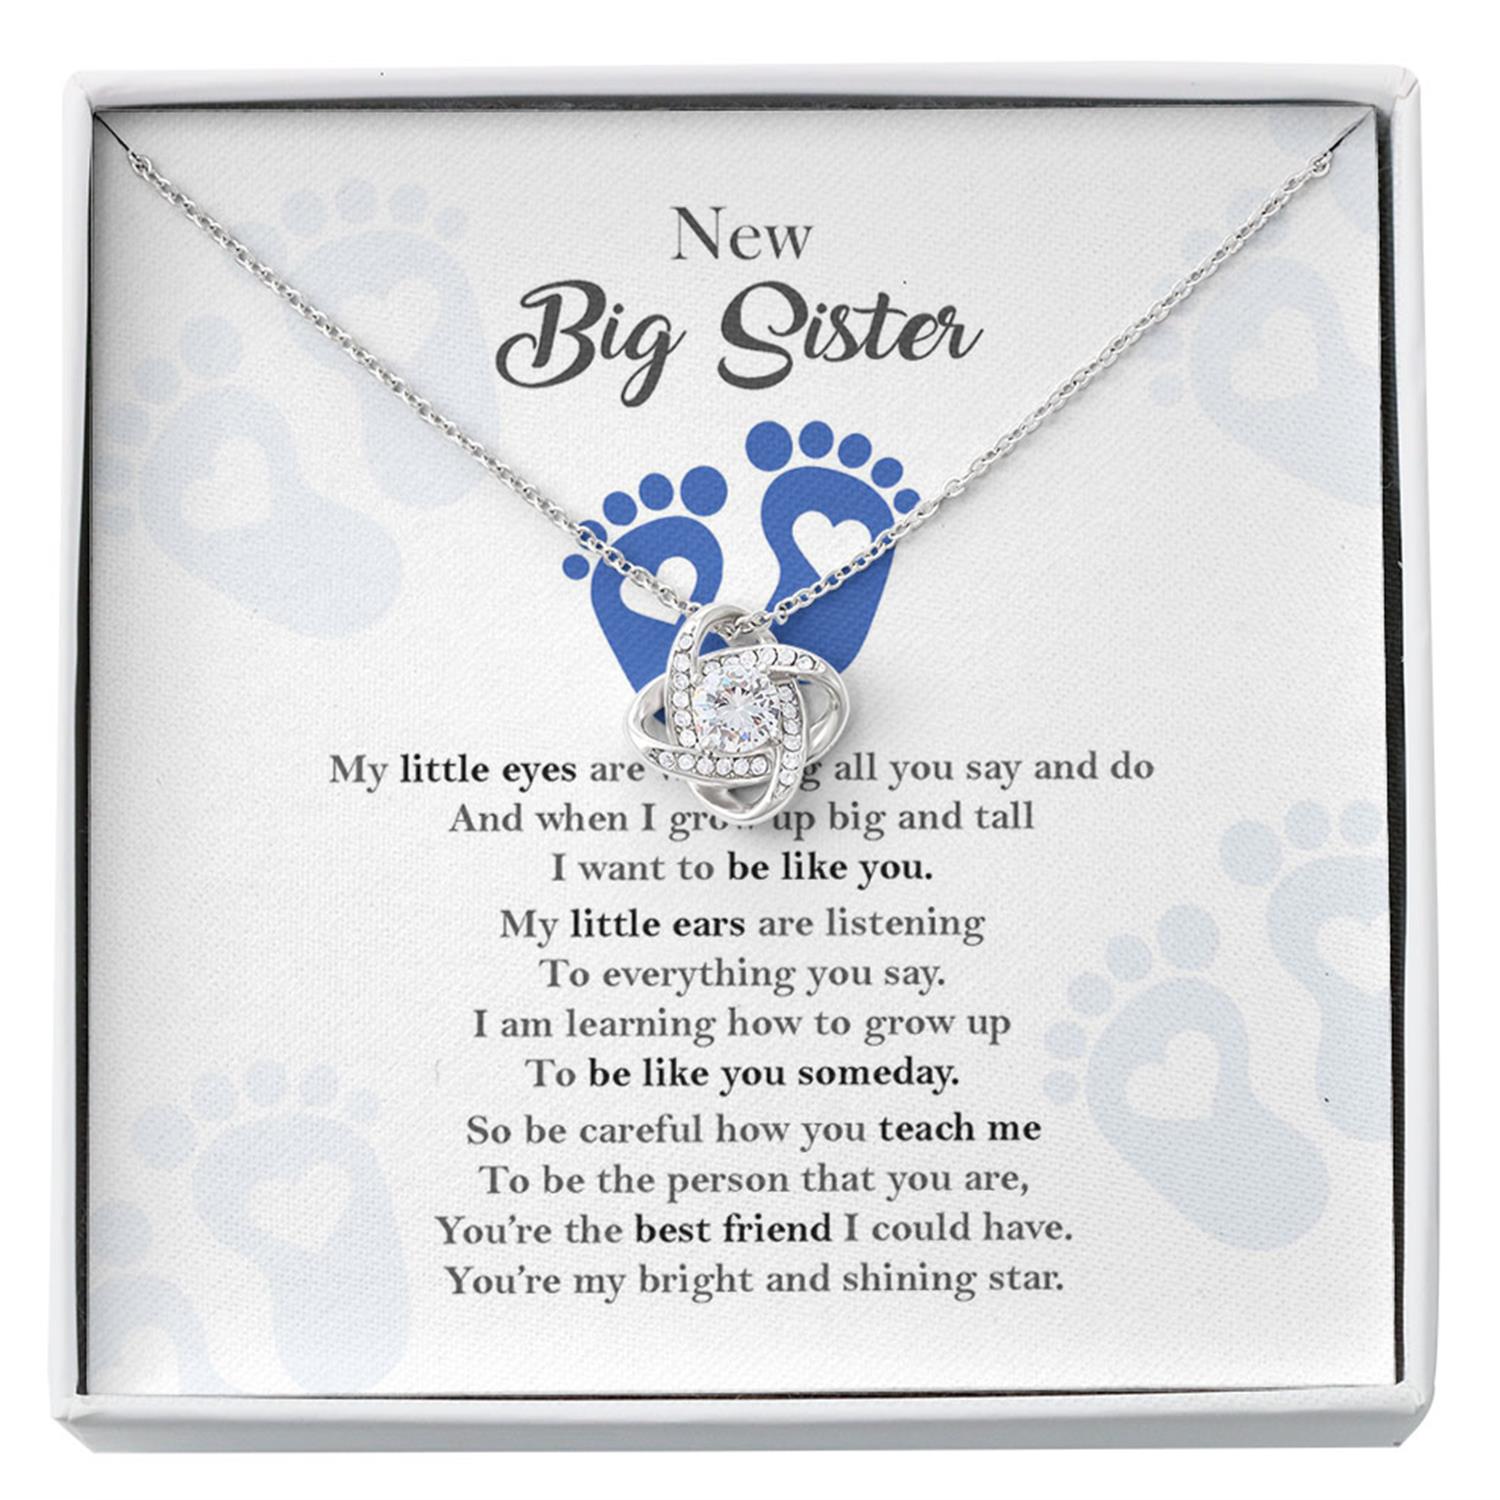 Sister Necklace, New Big Sister Gifts, Big Sister Gift From New Baby, Gifts For New Big Sister, Gifts From Baby To Big Sister, Future Big Sister Custom Necklace